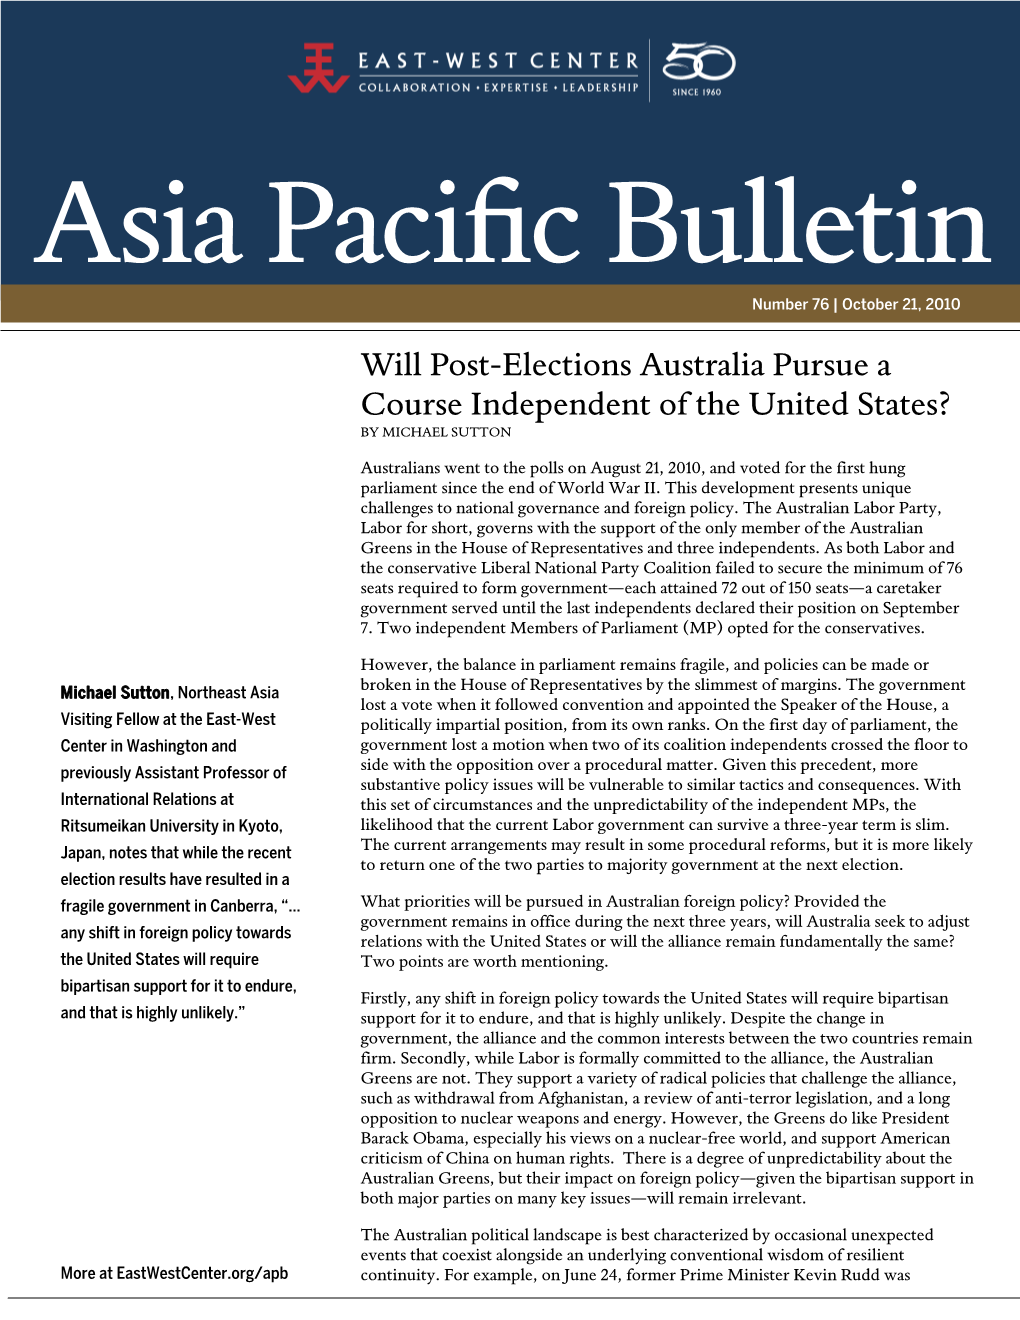 Will Post-Elections Australia Pursue a Course Independent of the United States? by MICHAEL SUTTON